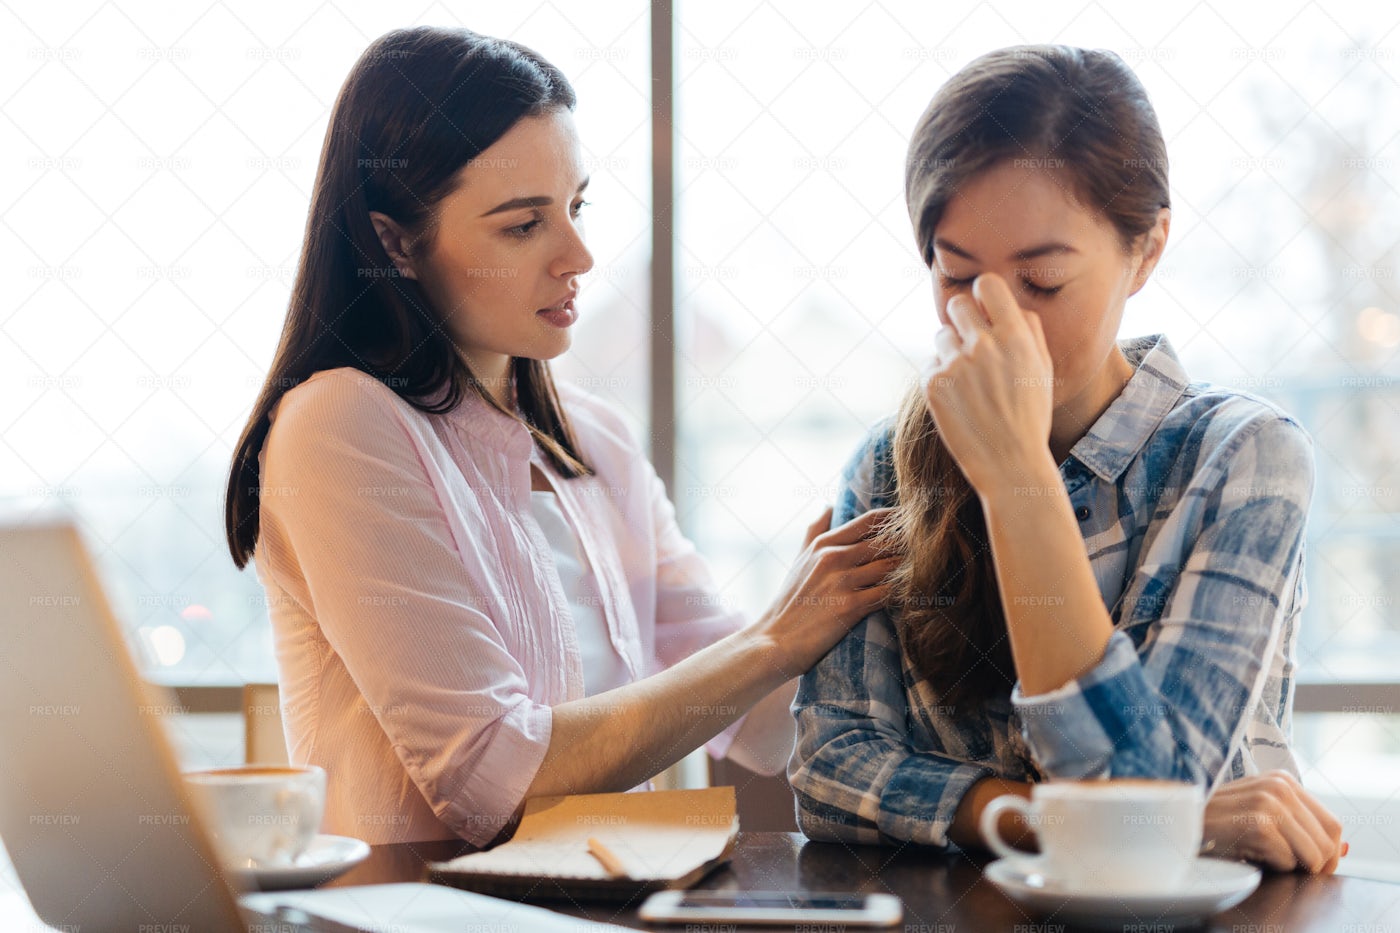 Consoling A Friend: Stock Photos